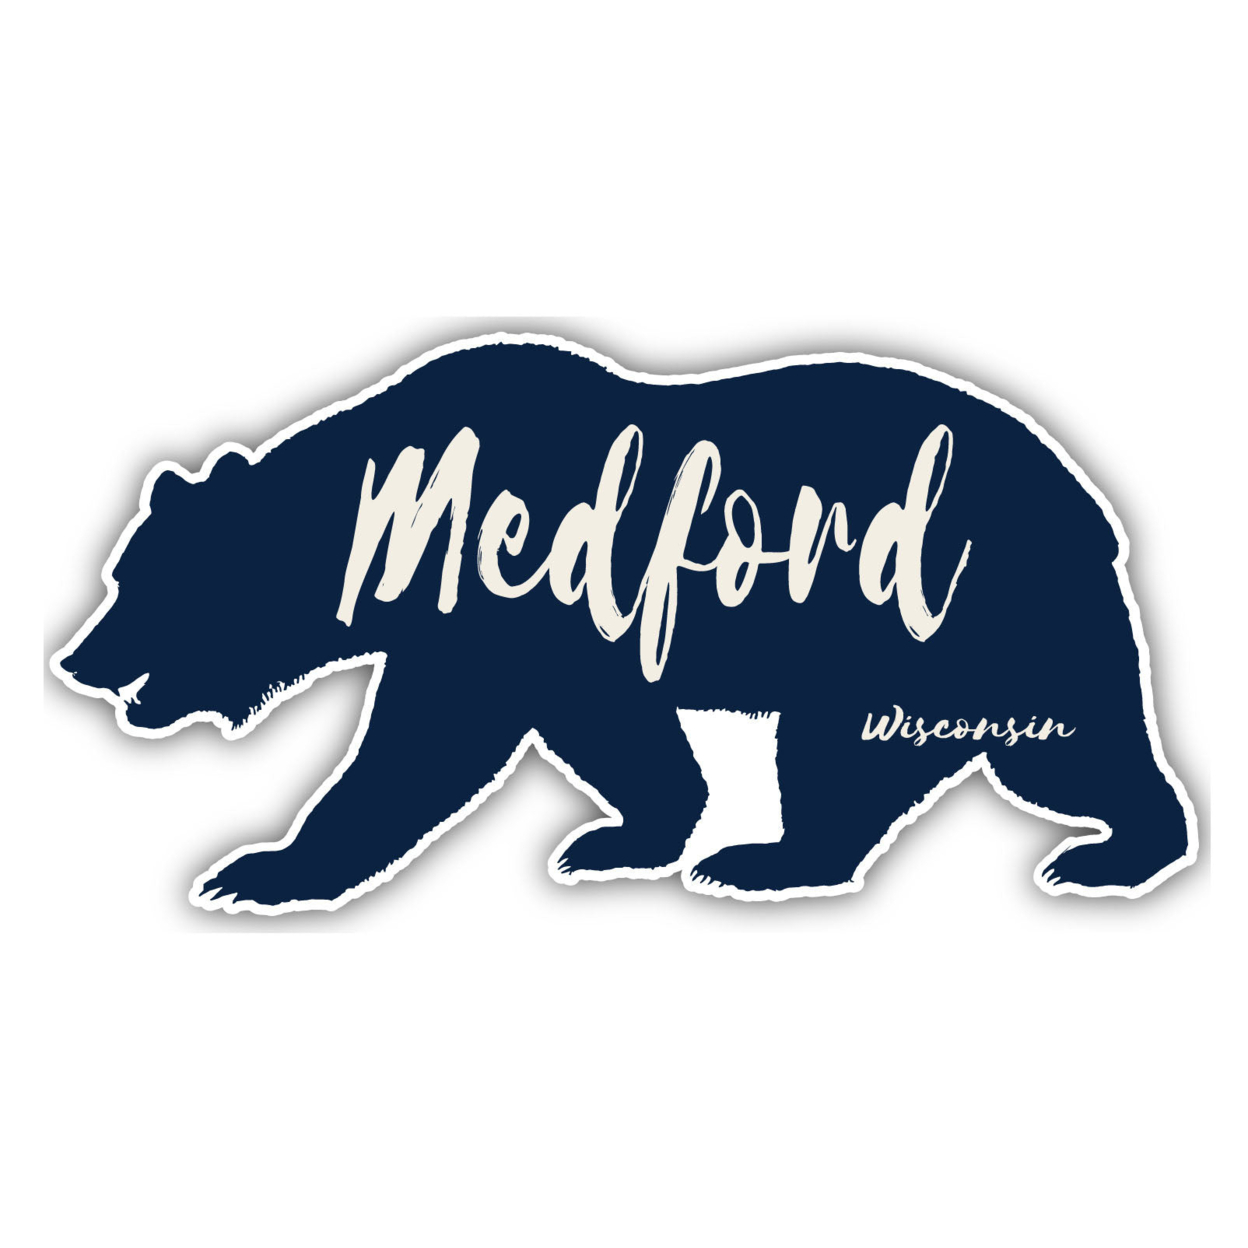 Medford Wisconsin Souvenir Decorative Stickers (Choose Theme And Size) - 2-Inch, Bear